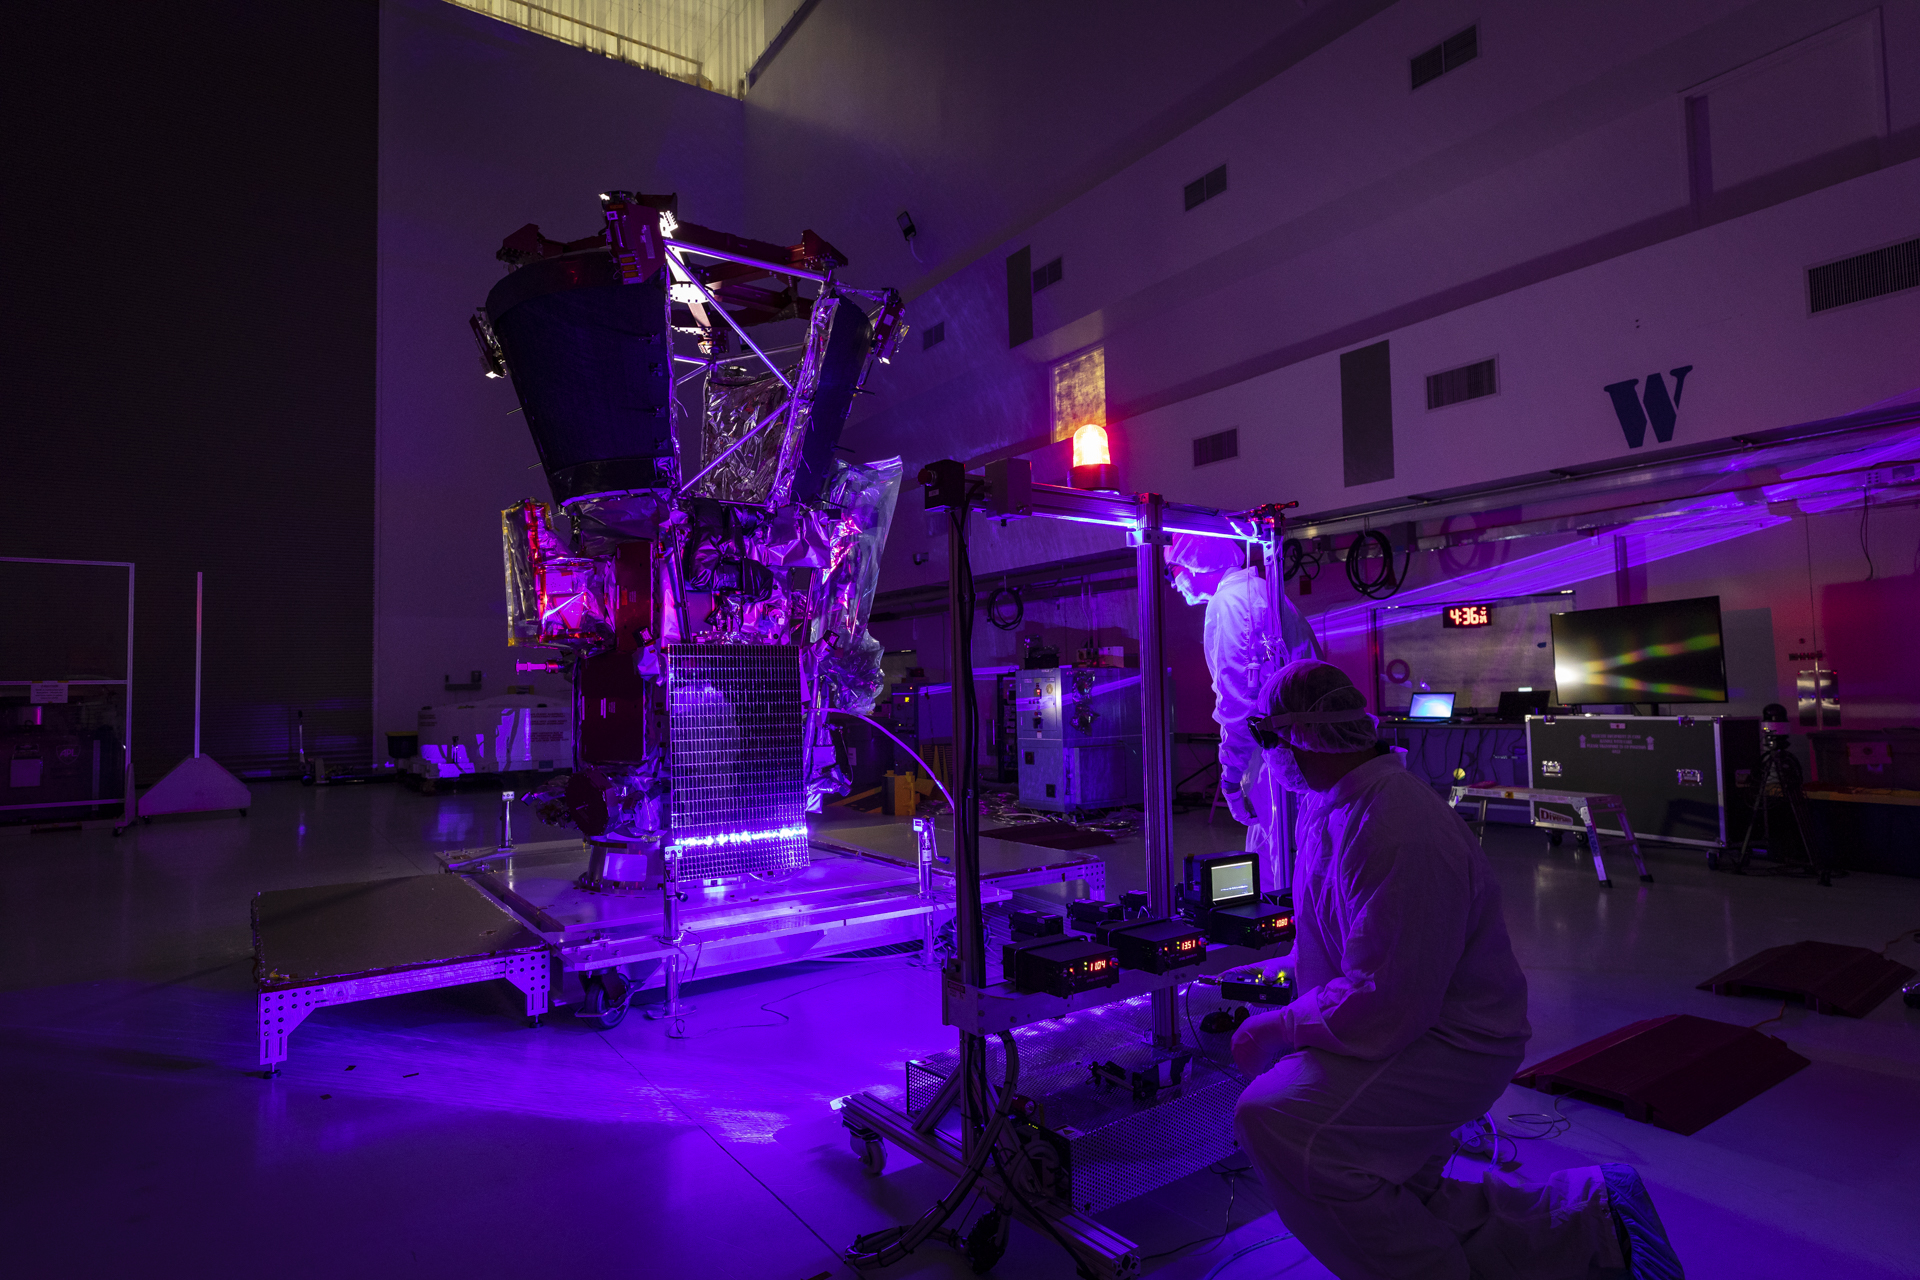 After installation of the solar arrays on May 31, 2018, Parker Solar Probe team members use a laser to illuminate the solar cells and verify that they can create electricity and transfer it to the spacecraft.